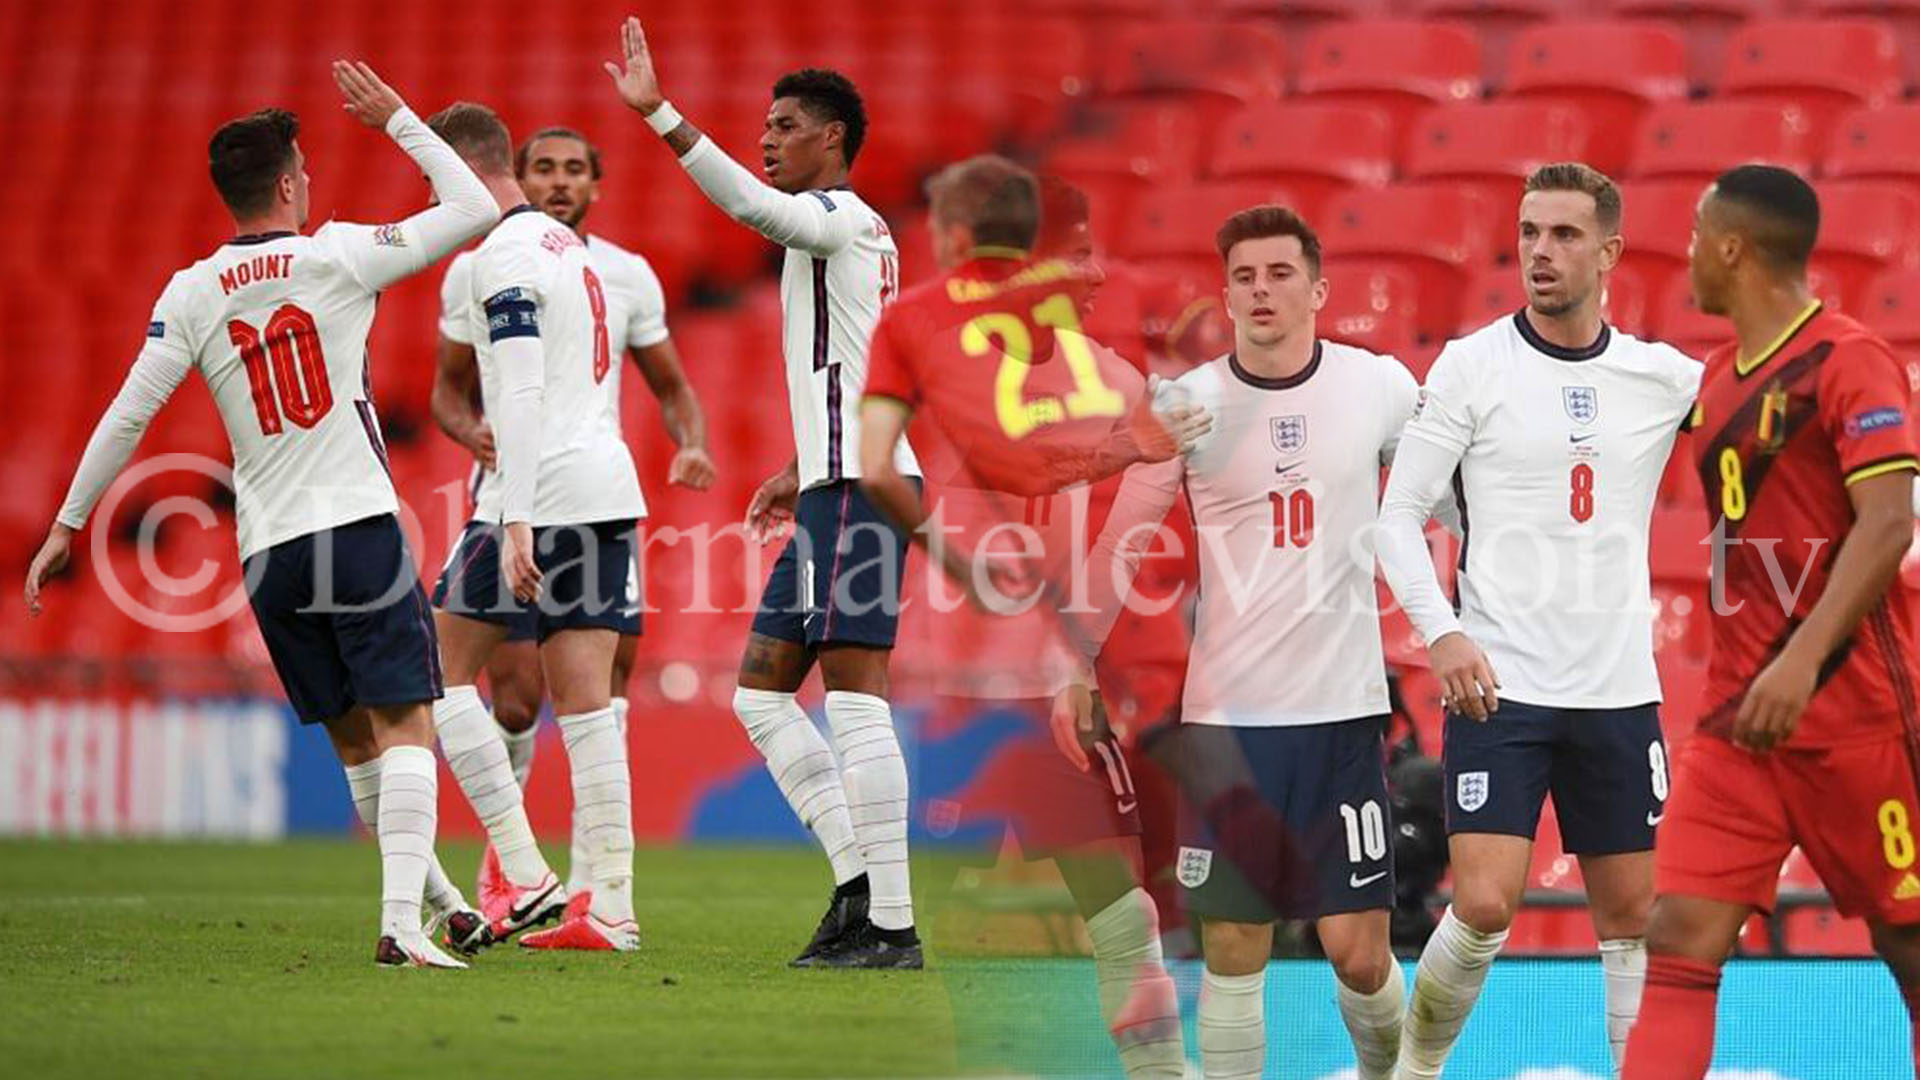 England beats Belgium 2-1, coming from behind, in UEFA Nations League